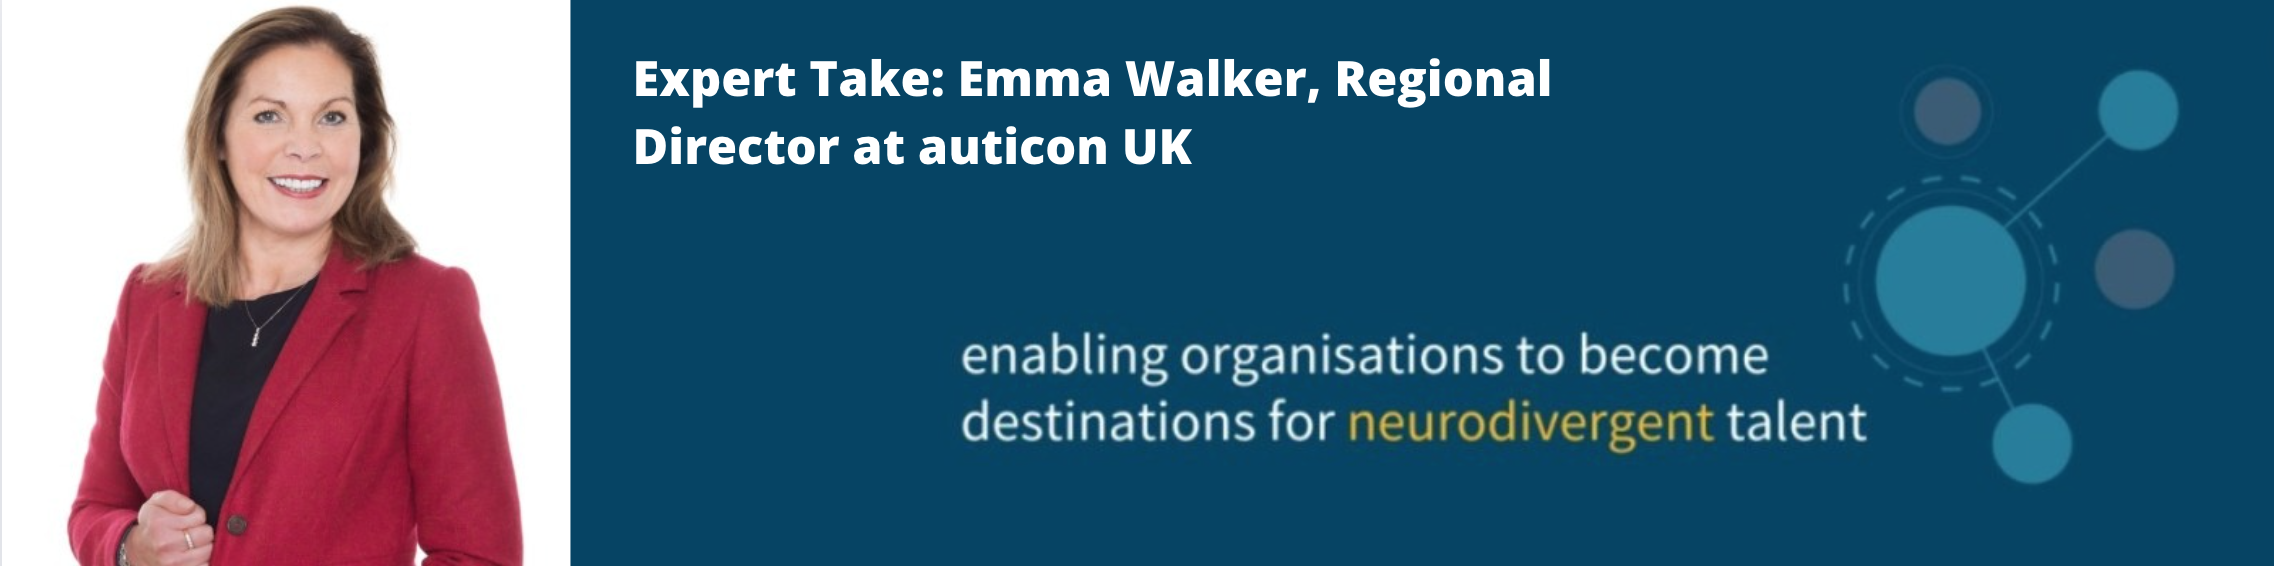 Photo of Emma Walker, facing the camera in a red jacket next to a heading that reads: Expert Take: Emma Walker, Regional Director at auticon UK. On a blue background.